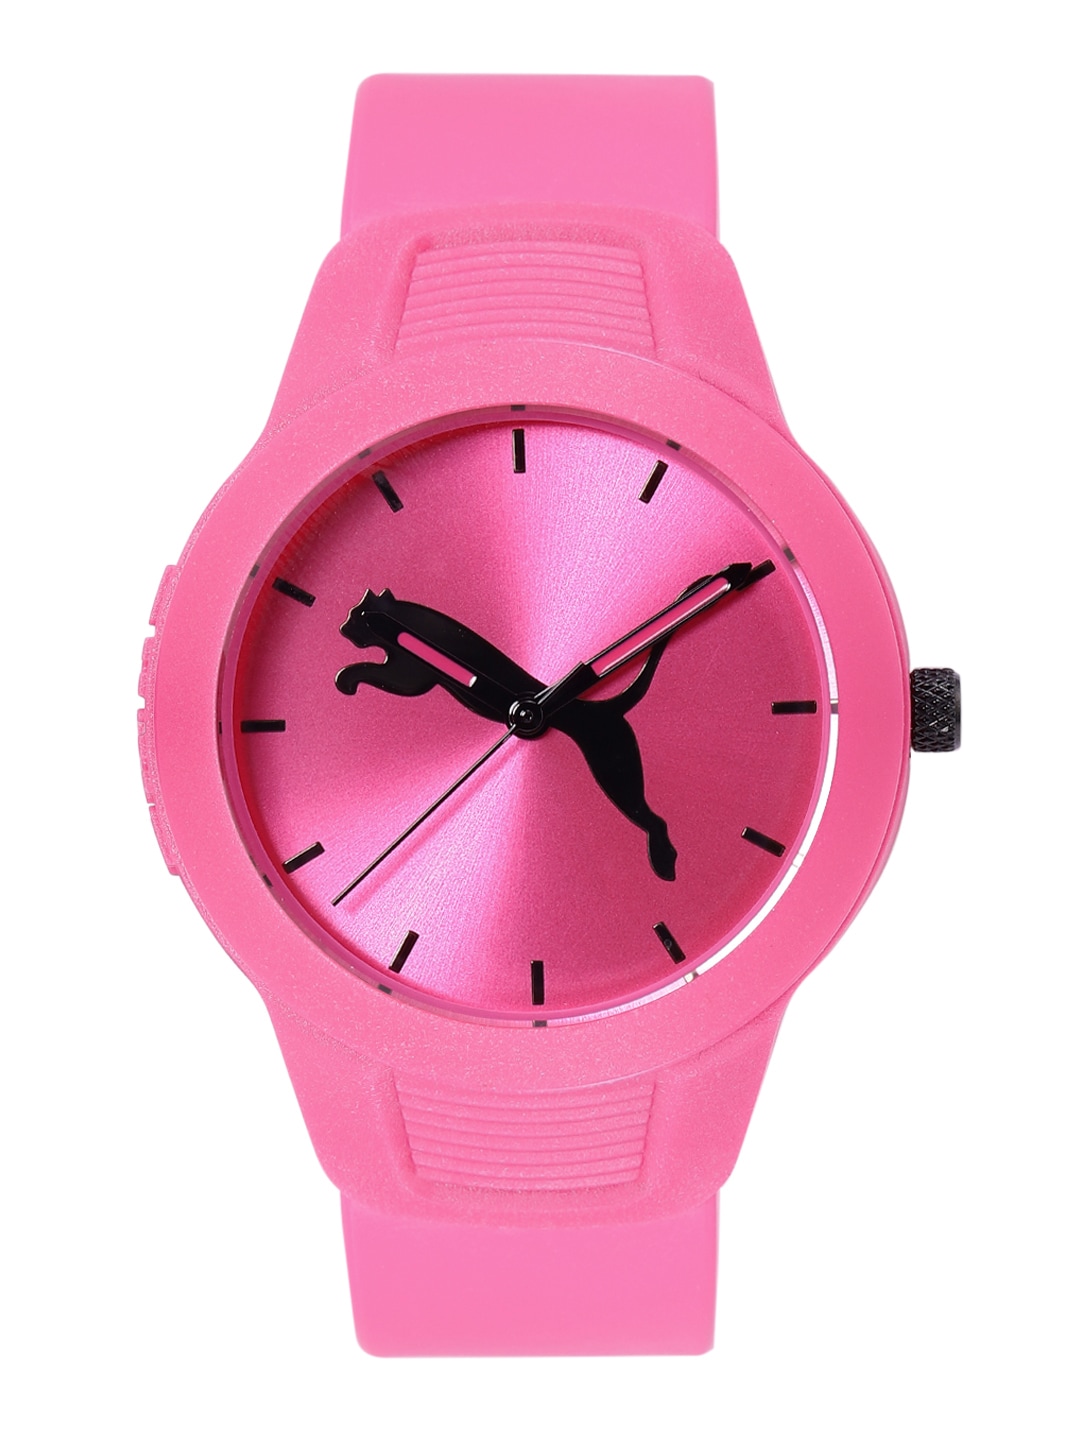 Puma Women Pink Printed Dial & Straps Reset V2 Analogue Watch P1015 Price in India